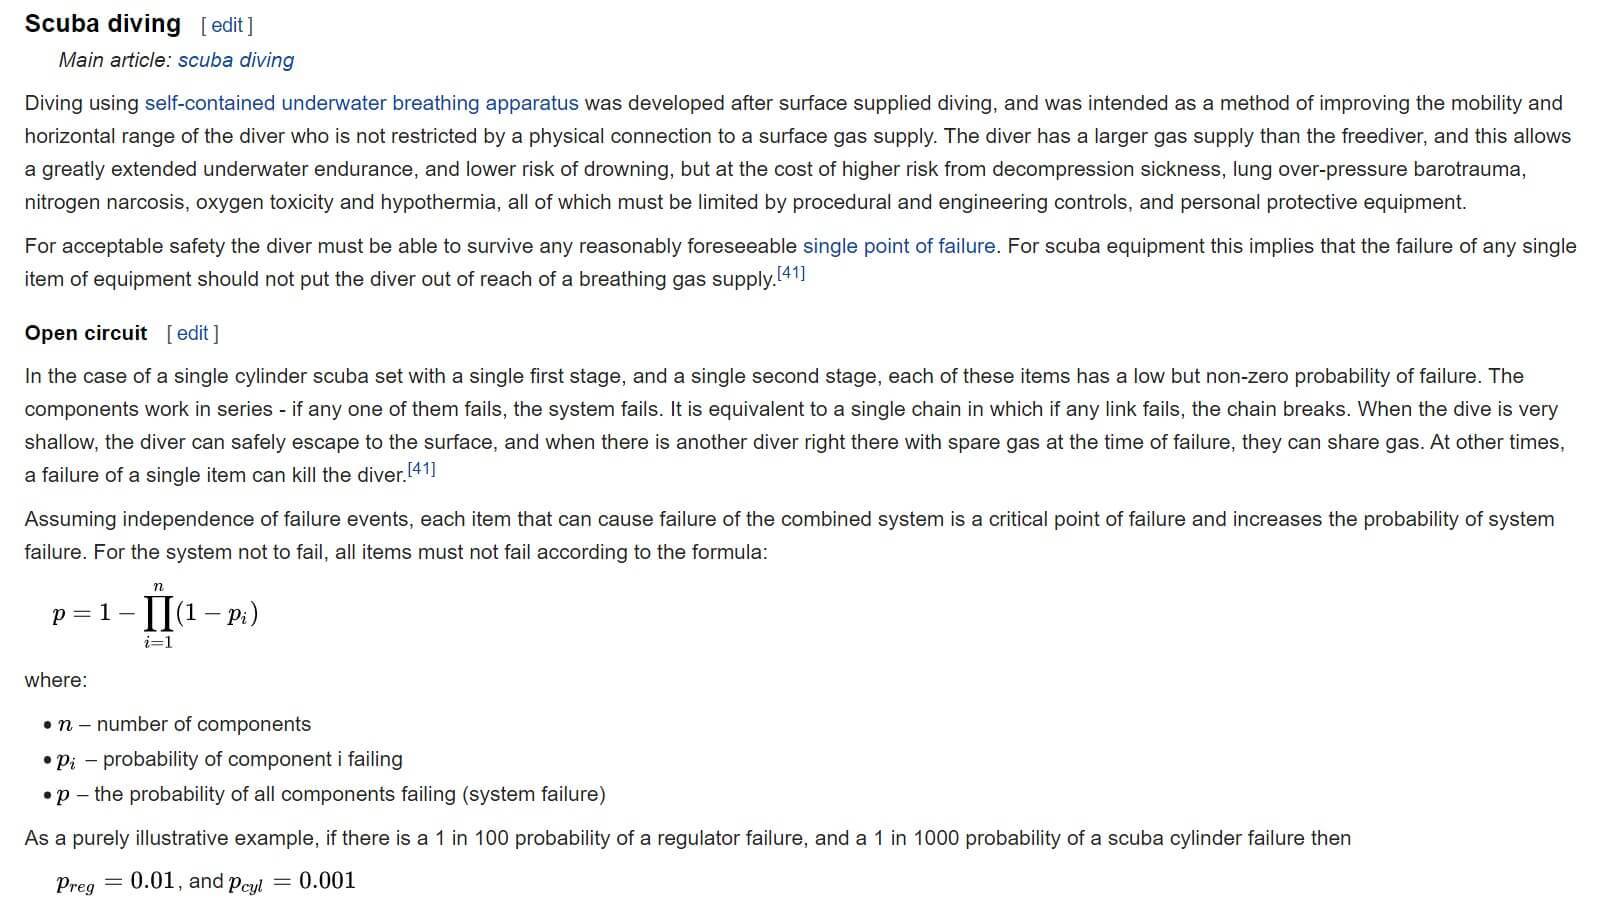 Screenshot of the Wikipedia article on diving safety